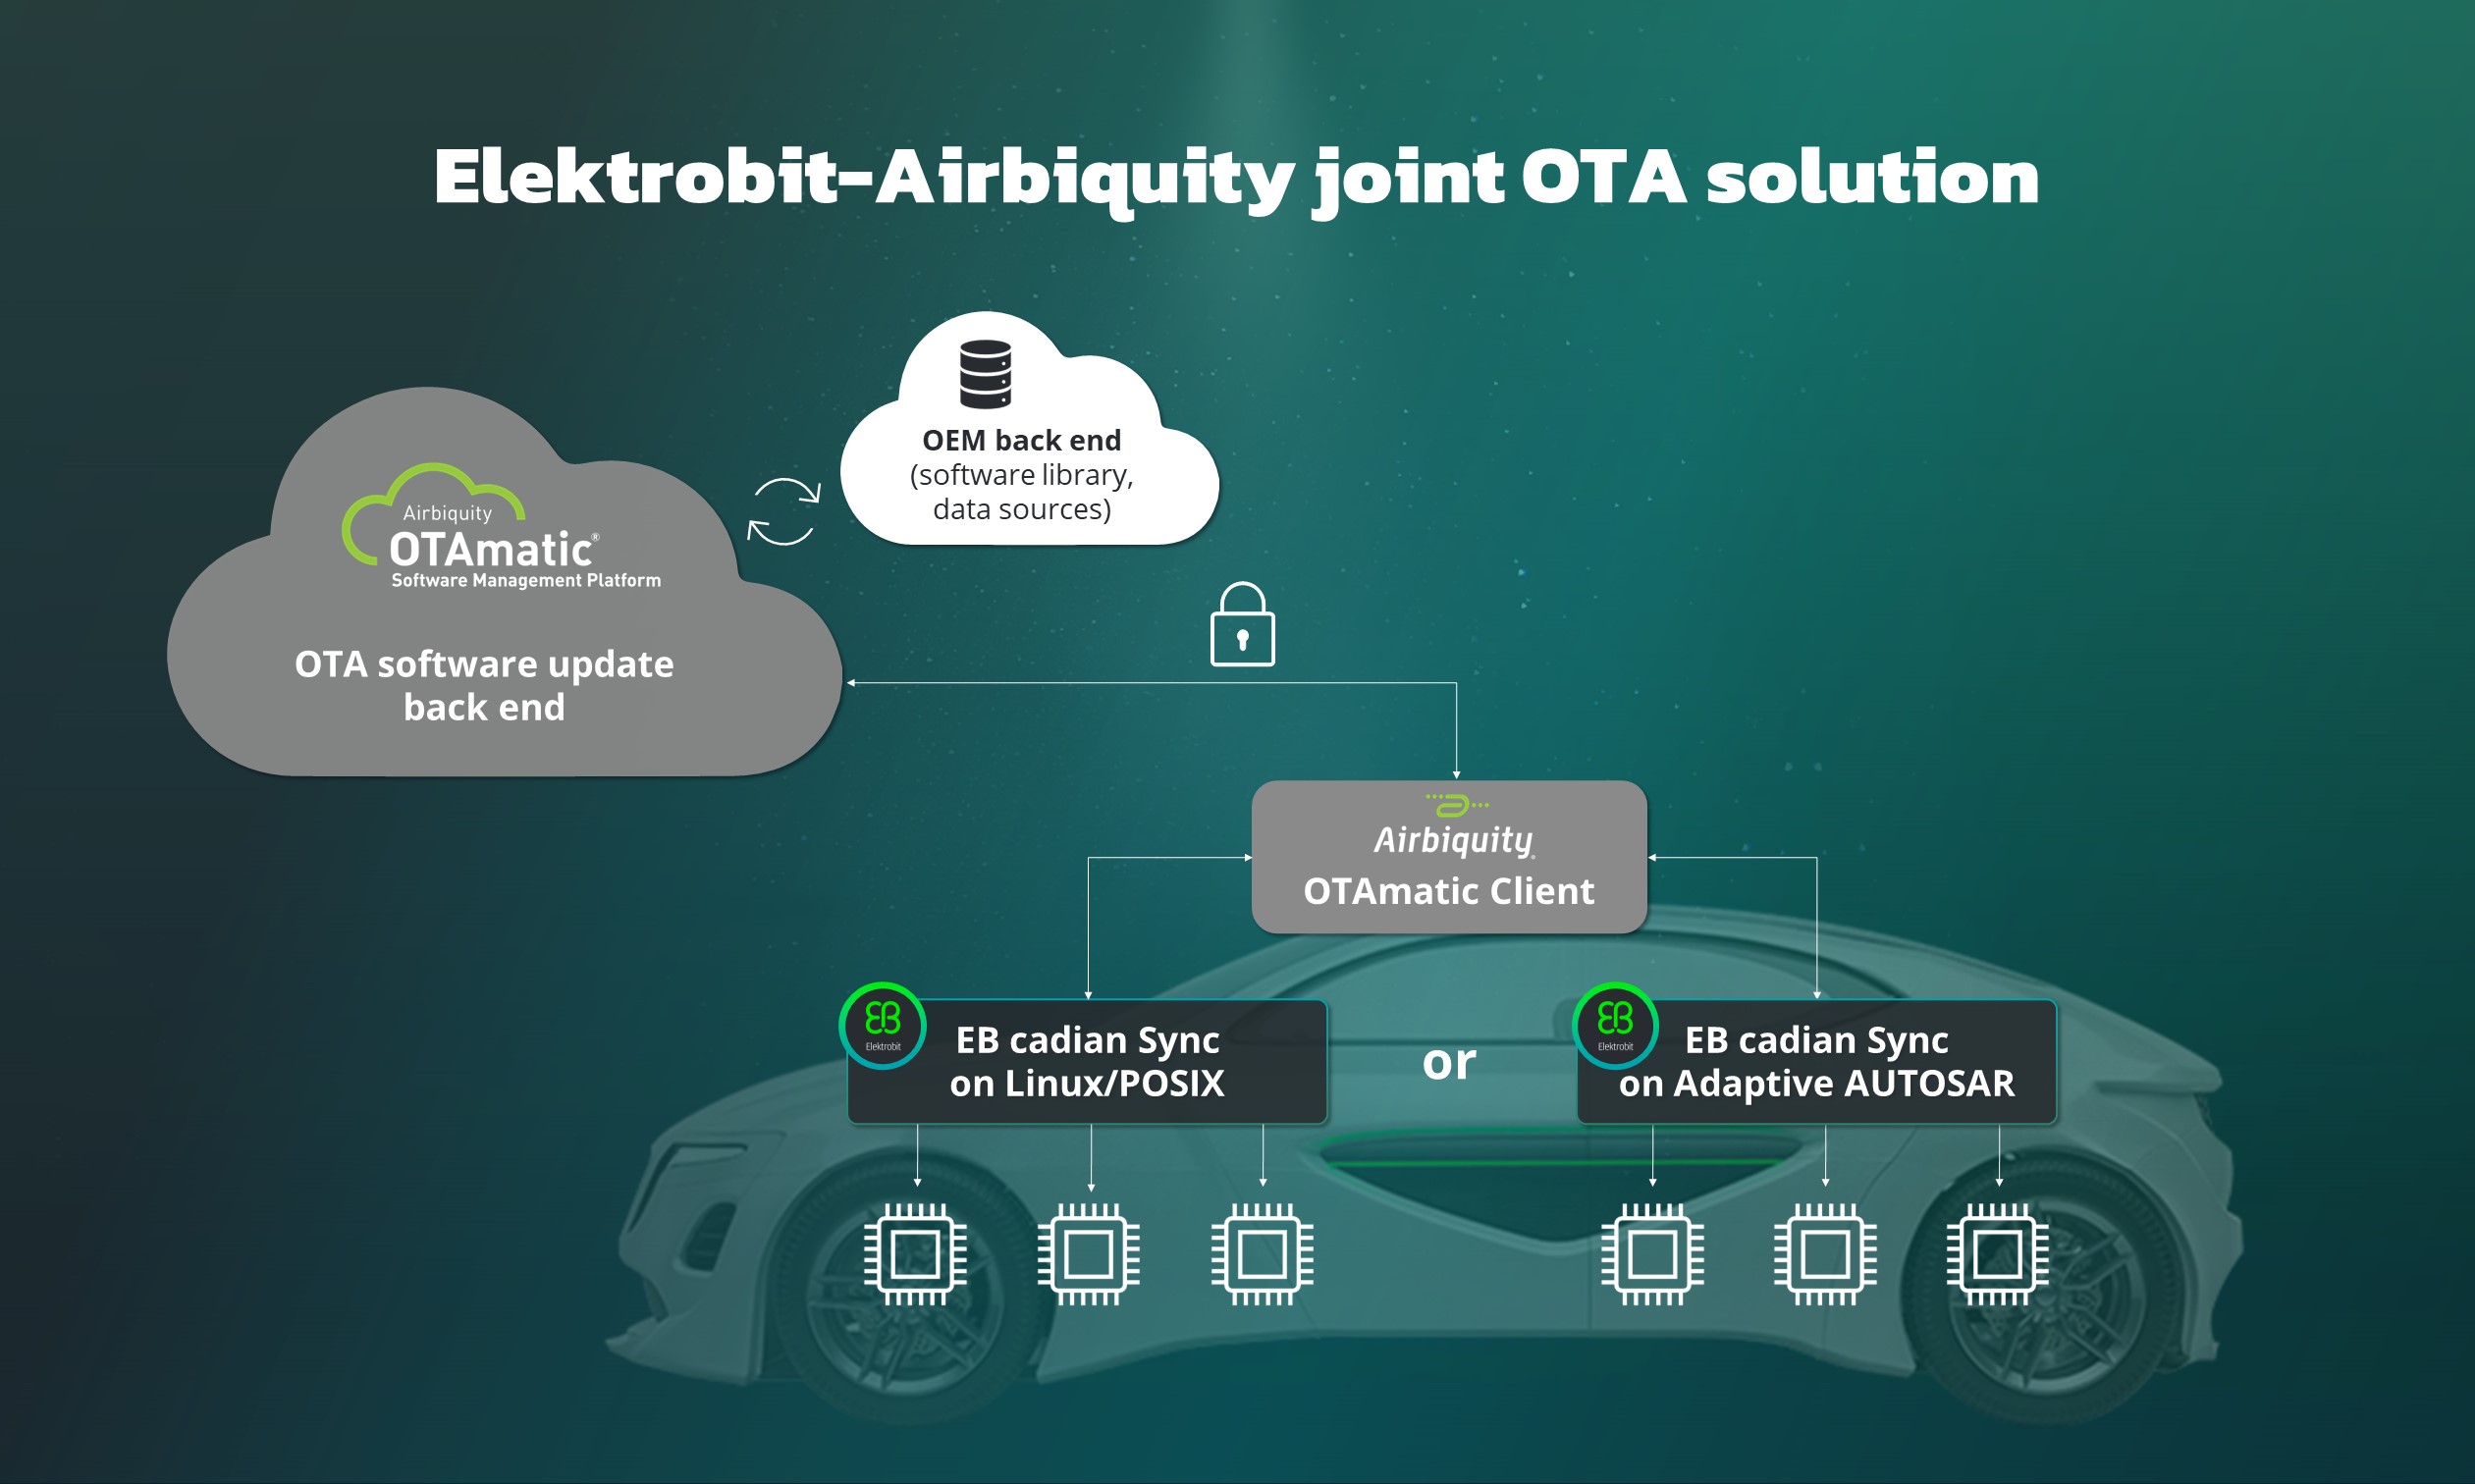 Elektrobit and Airbiquity joint next generation over-the-air (OTA) solution for the automotive mobility industry